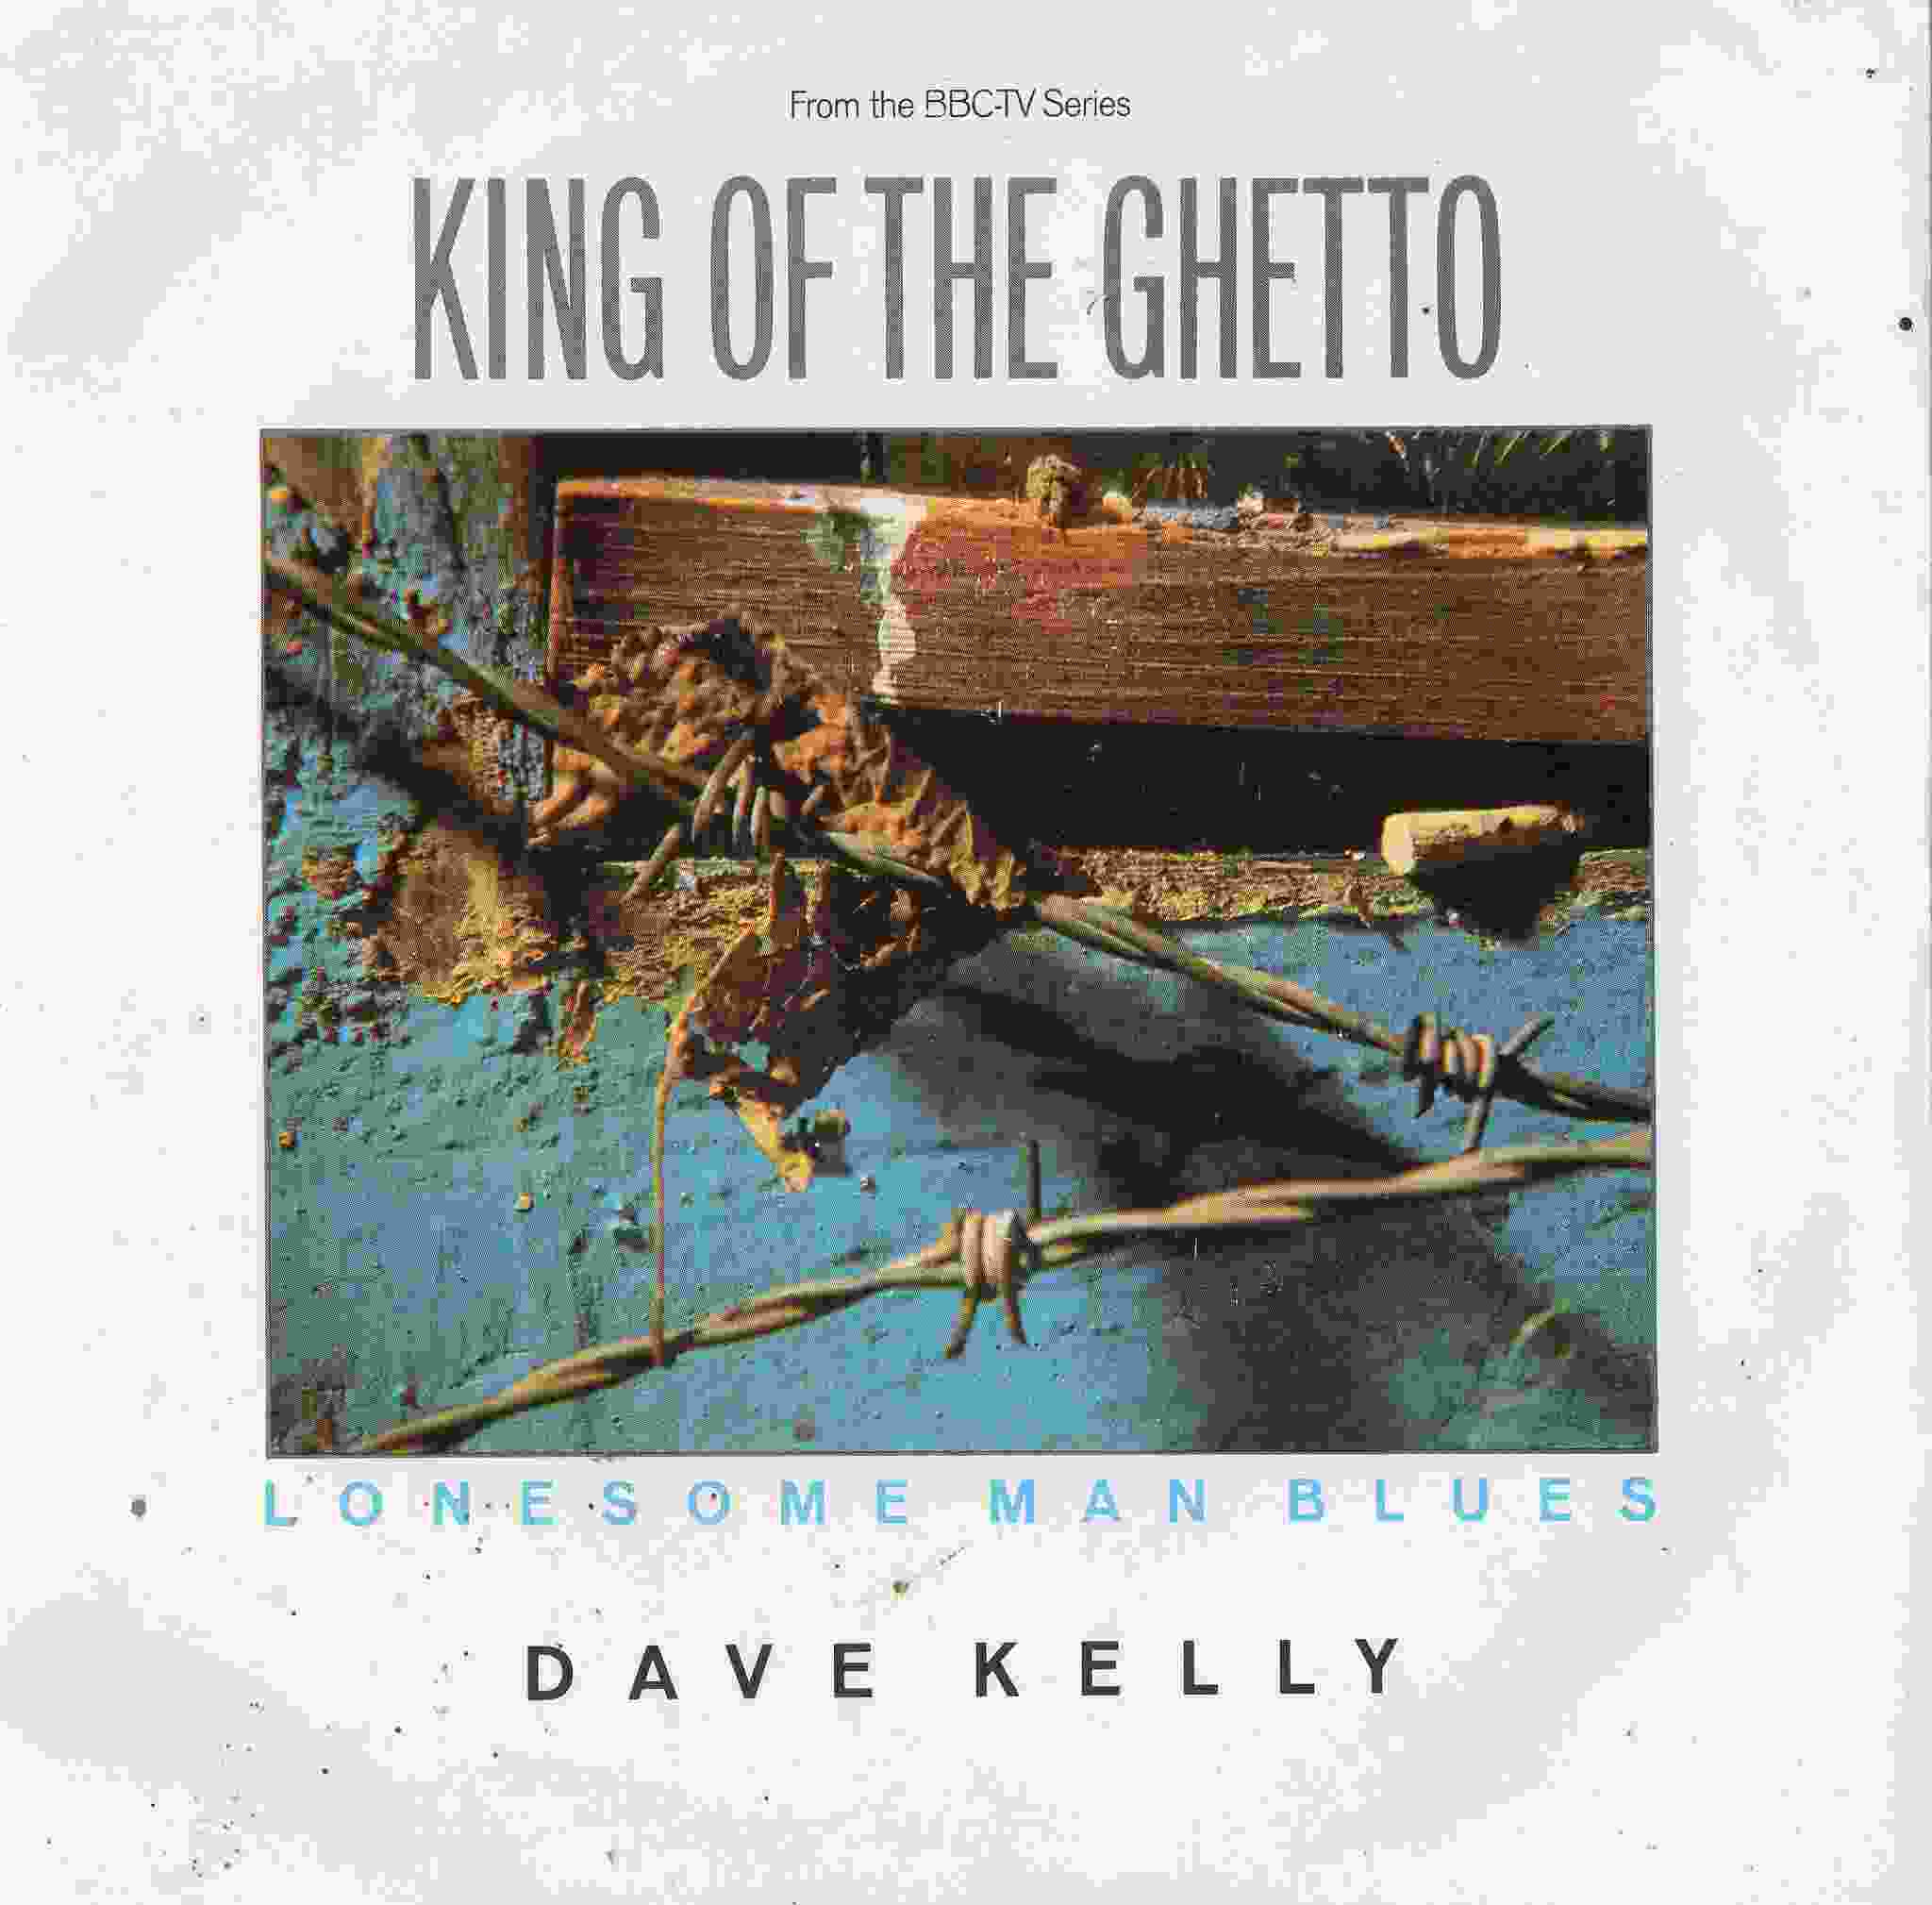 Picture of RESL 188 Lonesome man blues (King of the ghetto) by artist Dave Kelly from the BBC singles - Records and Tapes library